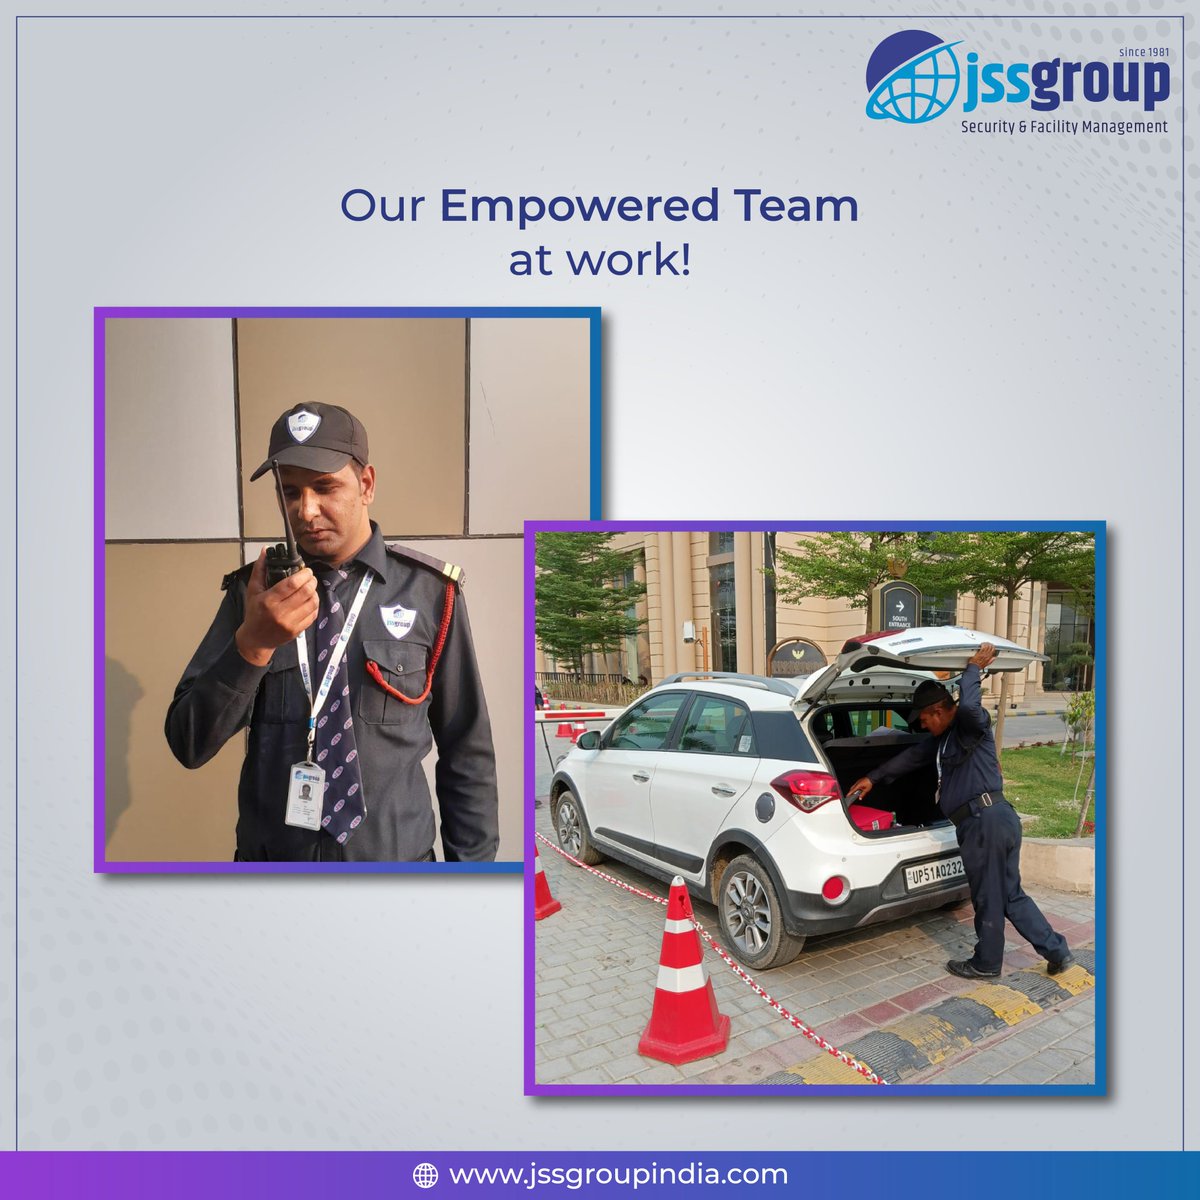 Take a look at our hardworking team on the ground for your security always!

.

.

#jss #jssgroup #jssecurity #securityservices #securityguard #securityindustry #preventcrime #heightenedawareness #physicalsurveillance #maintainssafety #decorum #propertysafety #securityassurance